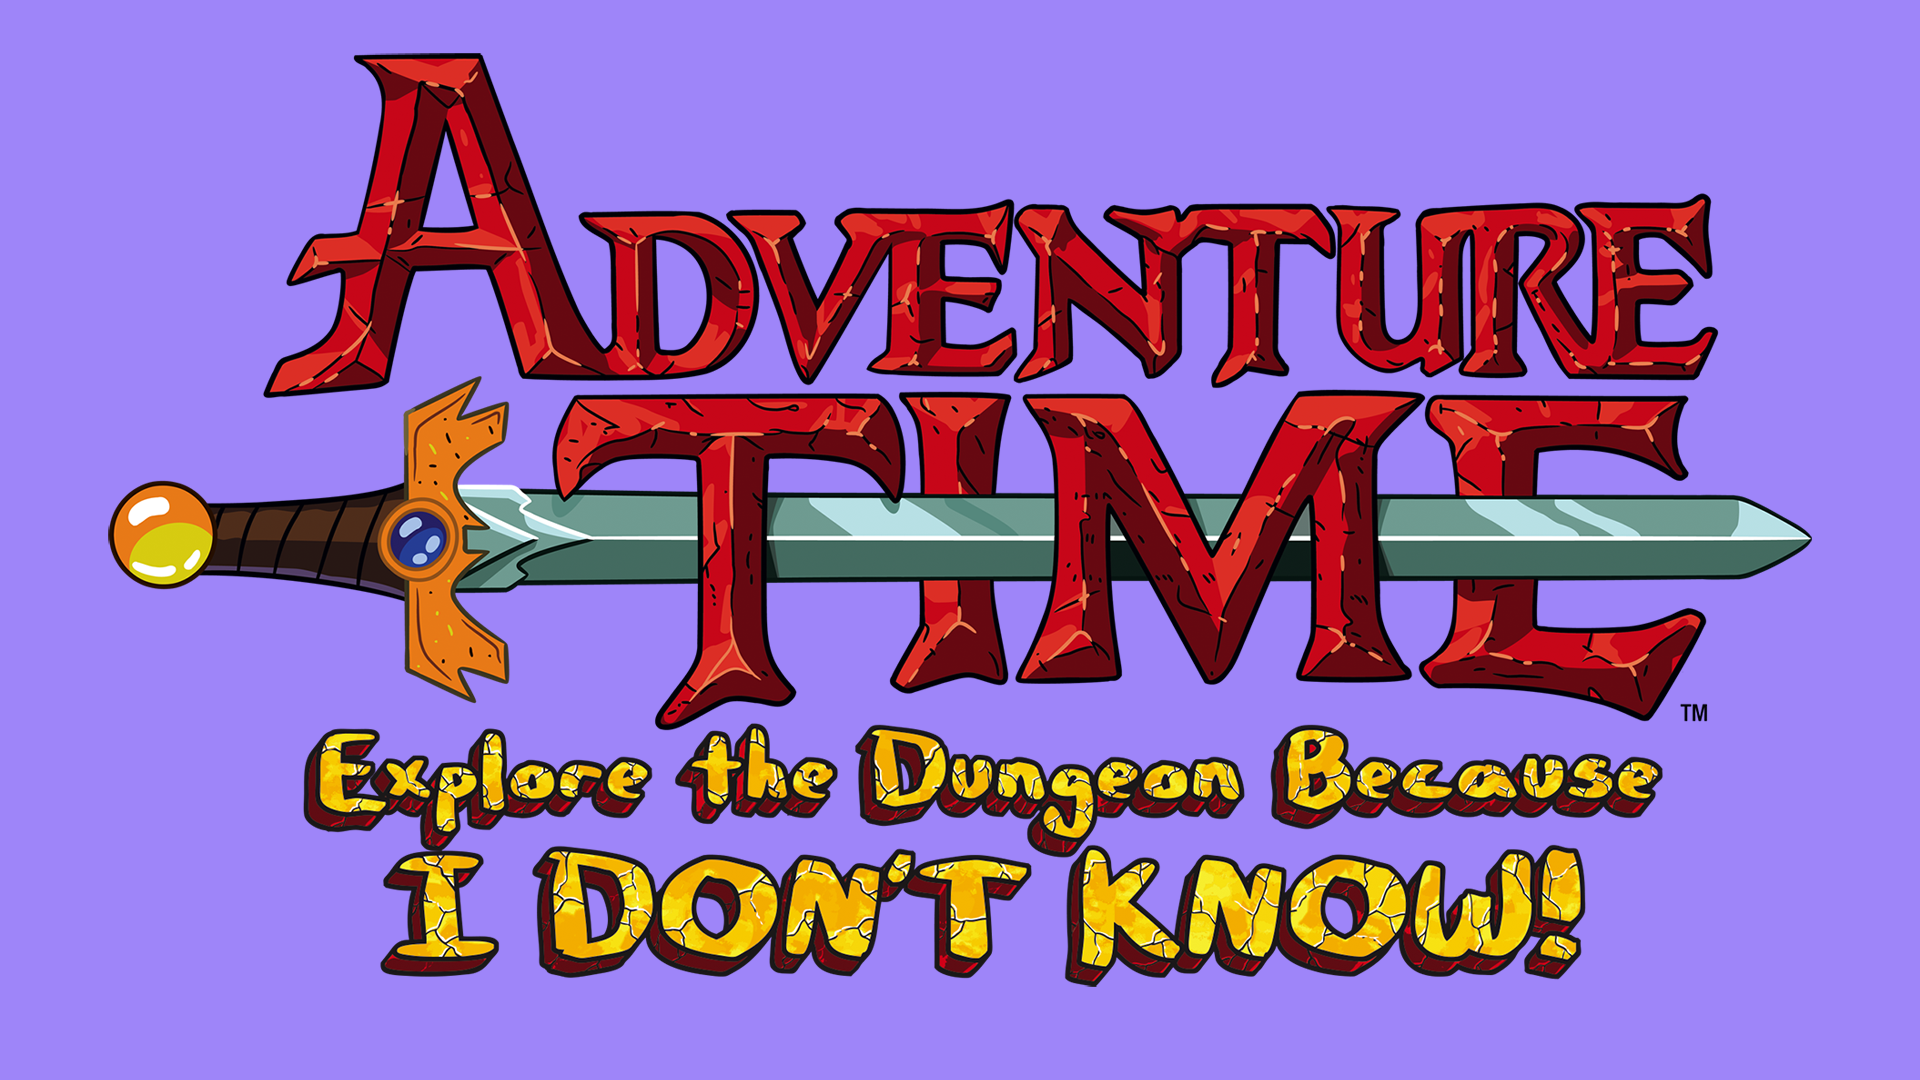 Adventure Time: Explore the Dungeon Because I DON'T KNOW! Logo